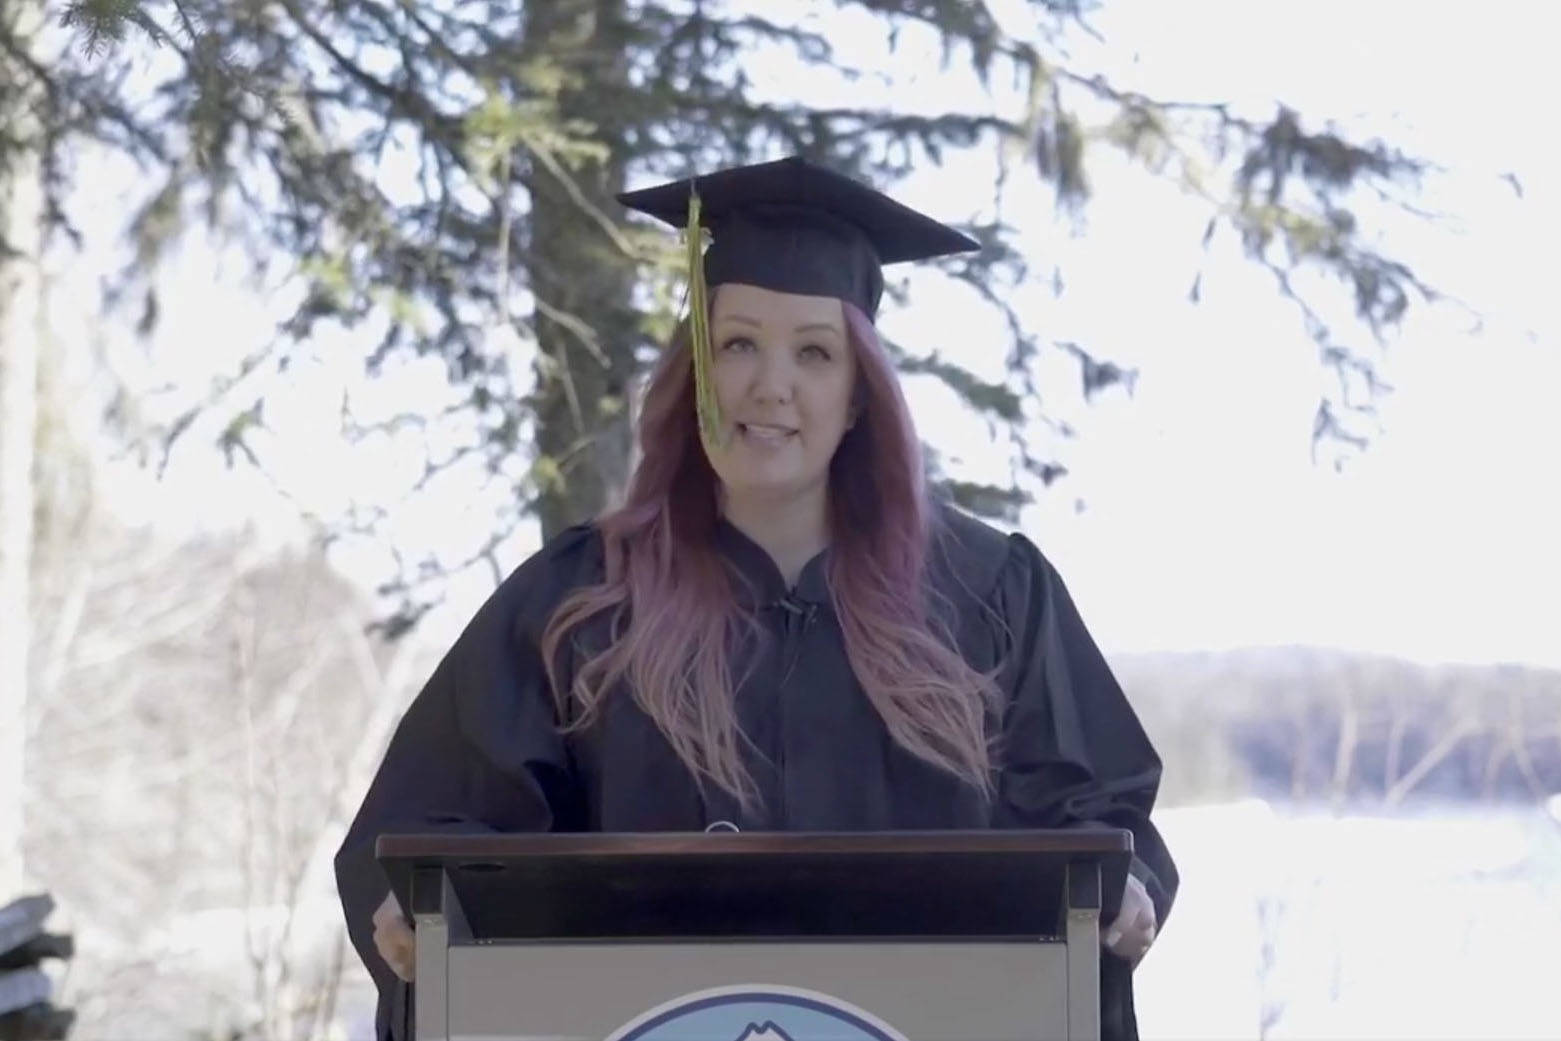 Kenai River Campus Valedictorian Michelle Wicker speaks during Kenai Peninsula College’s virtual commencement ceremony on Thursday, May 6, 2021. (Screenshot)